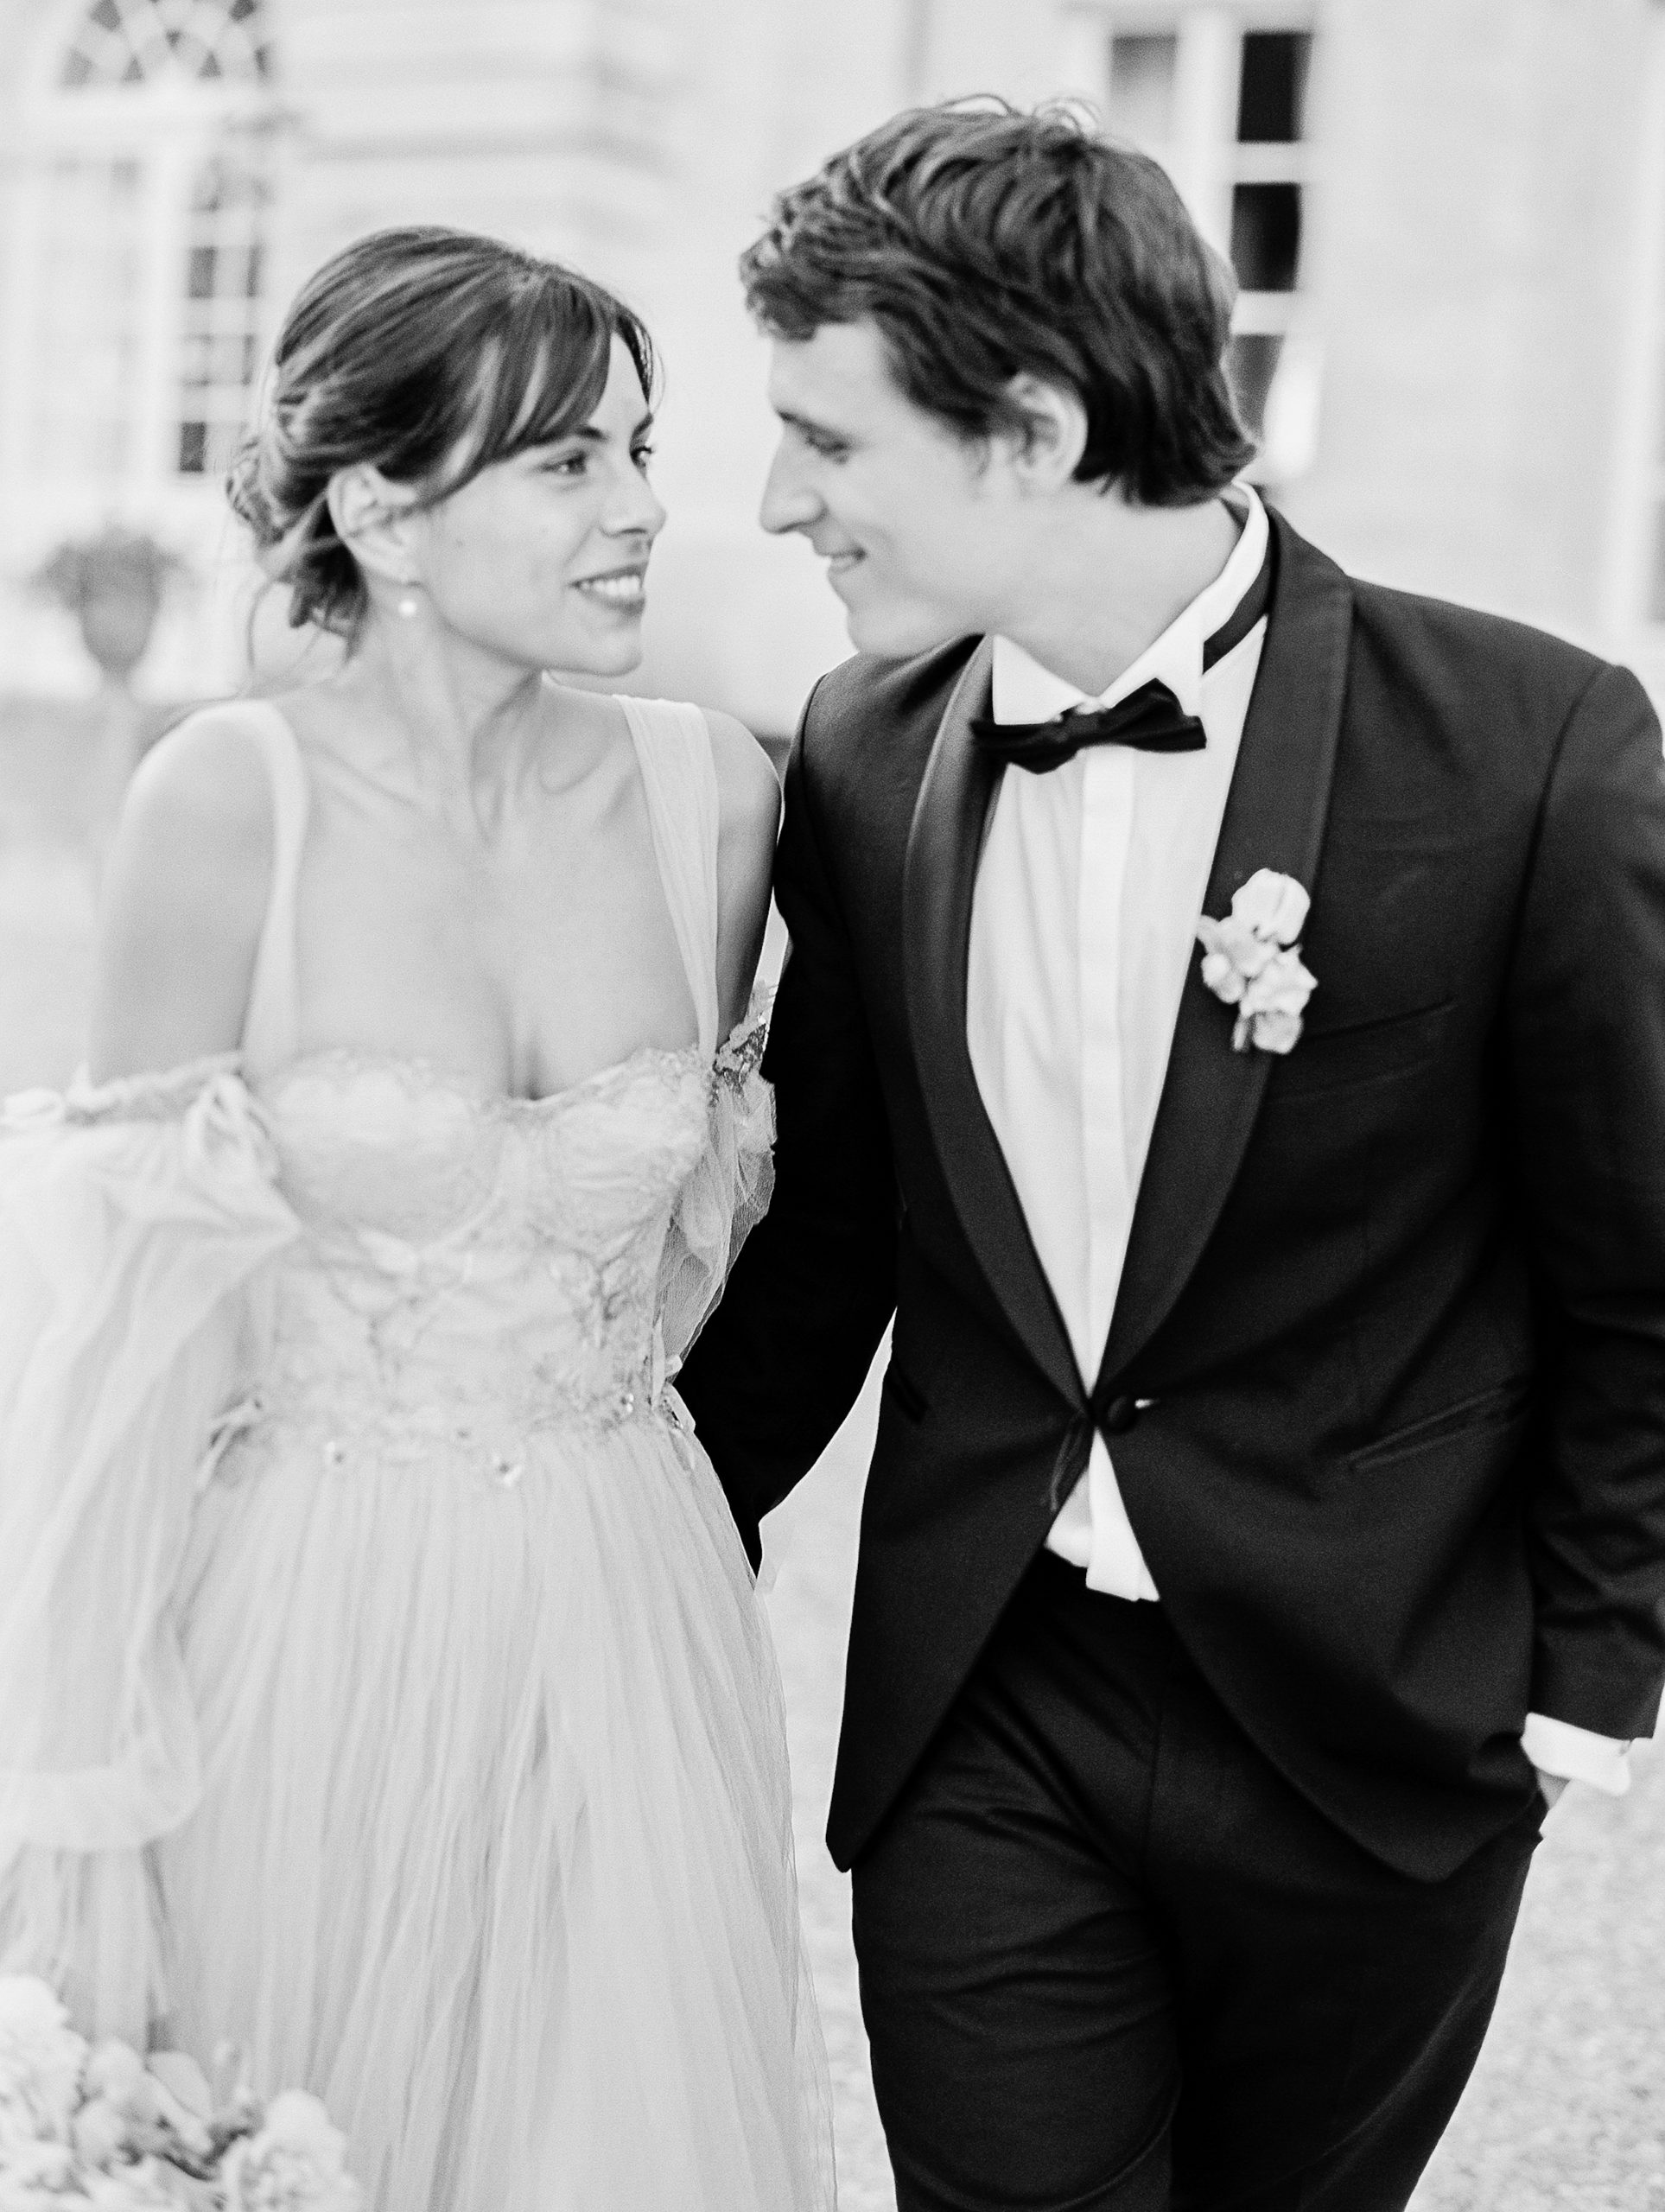 Bride and groom smile at each other in black and white